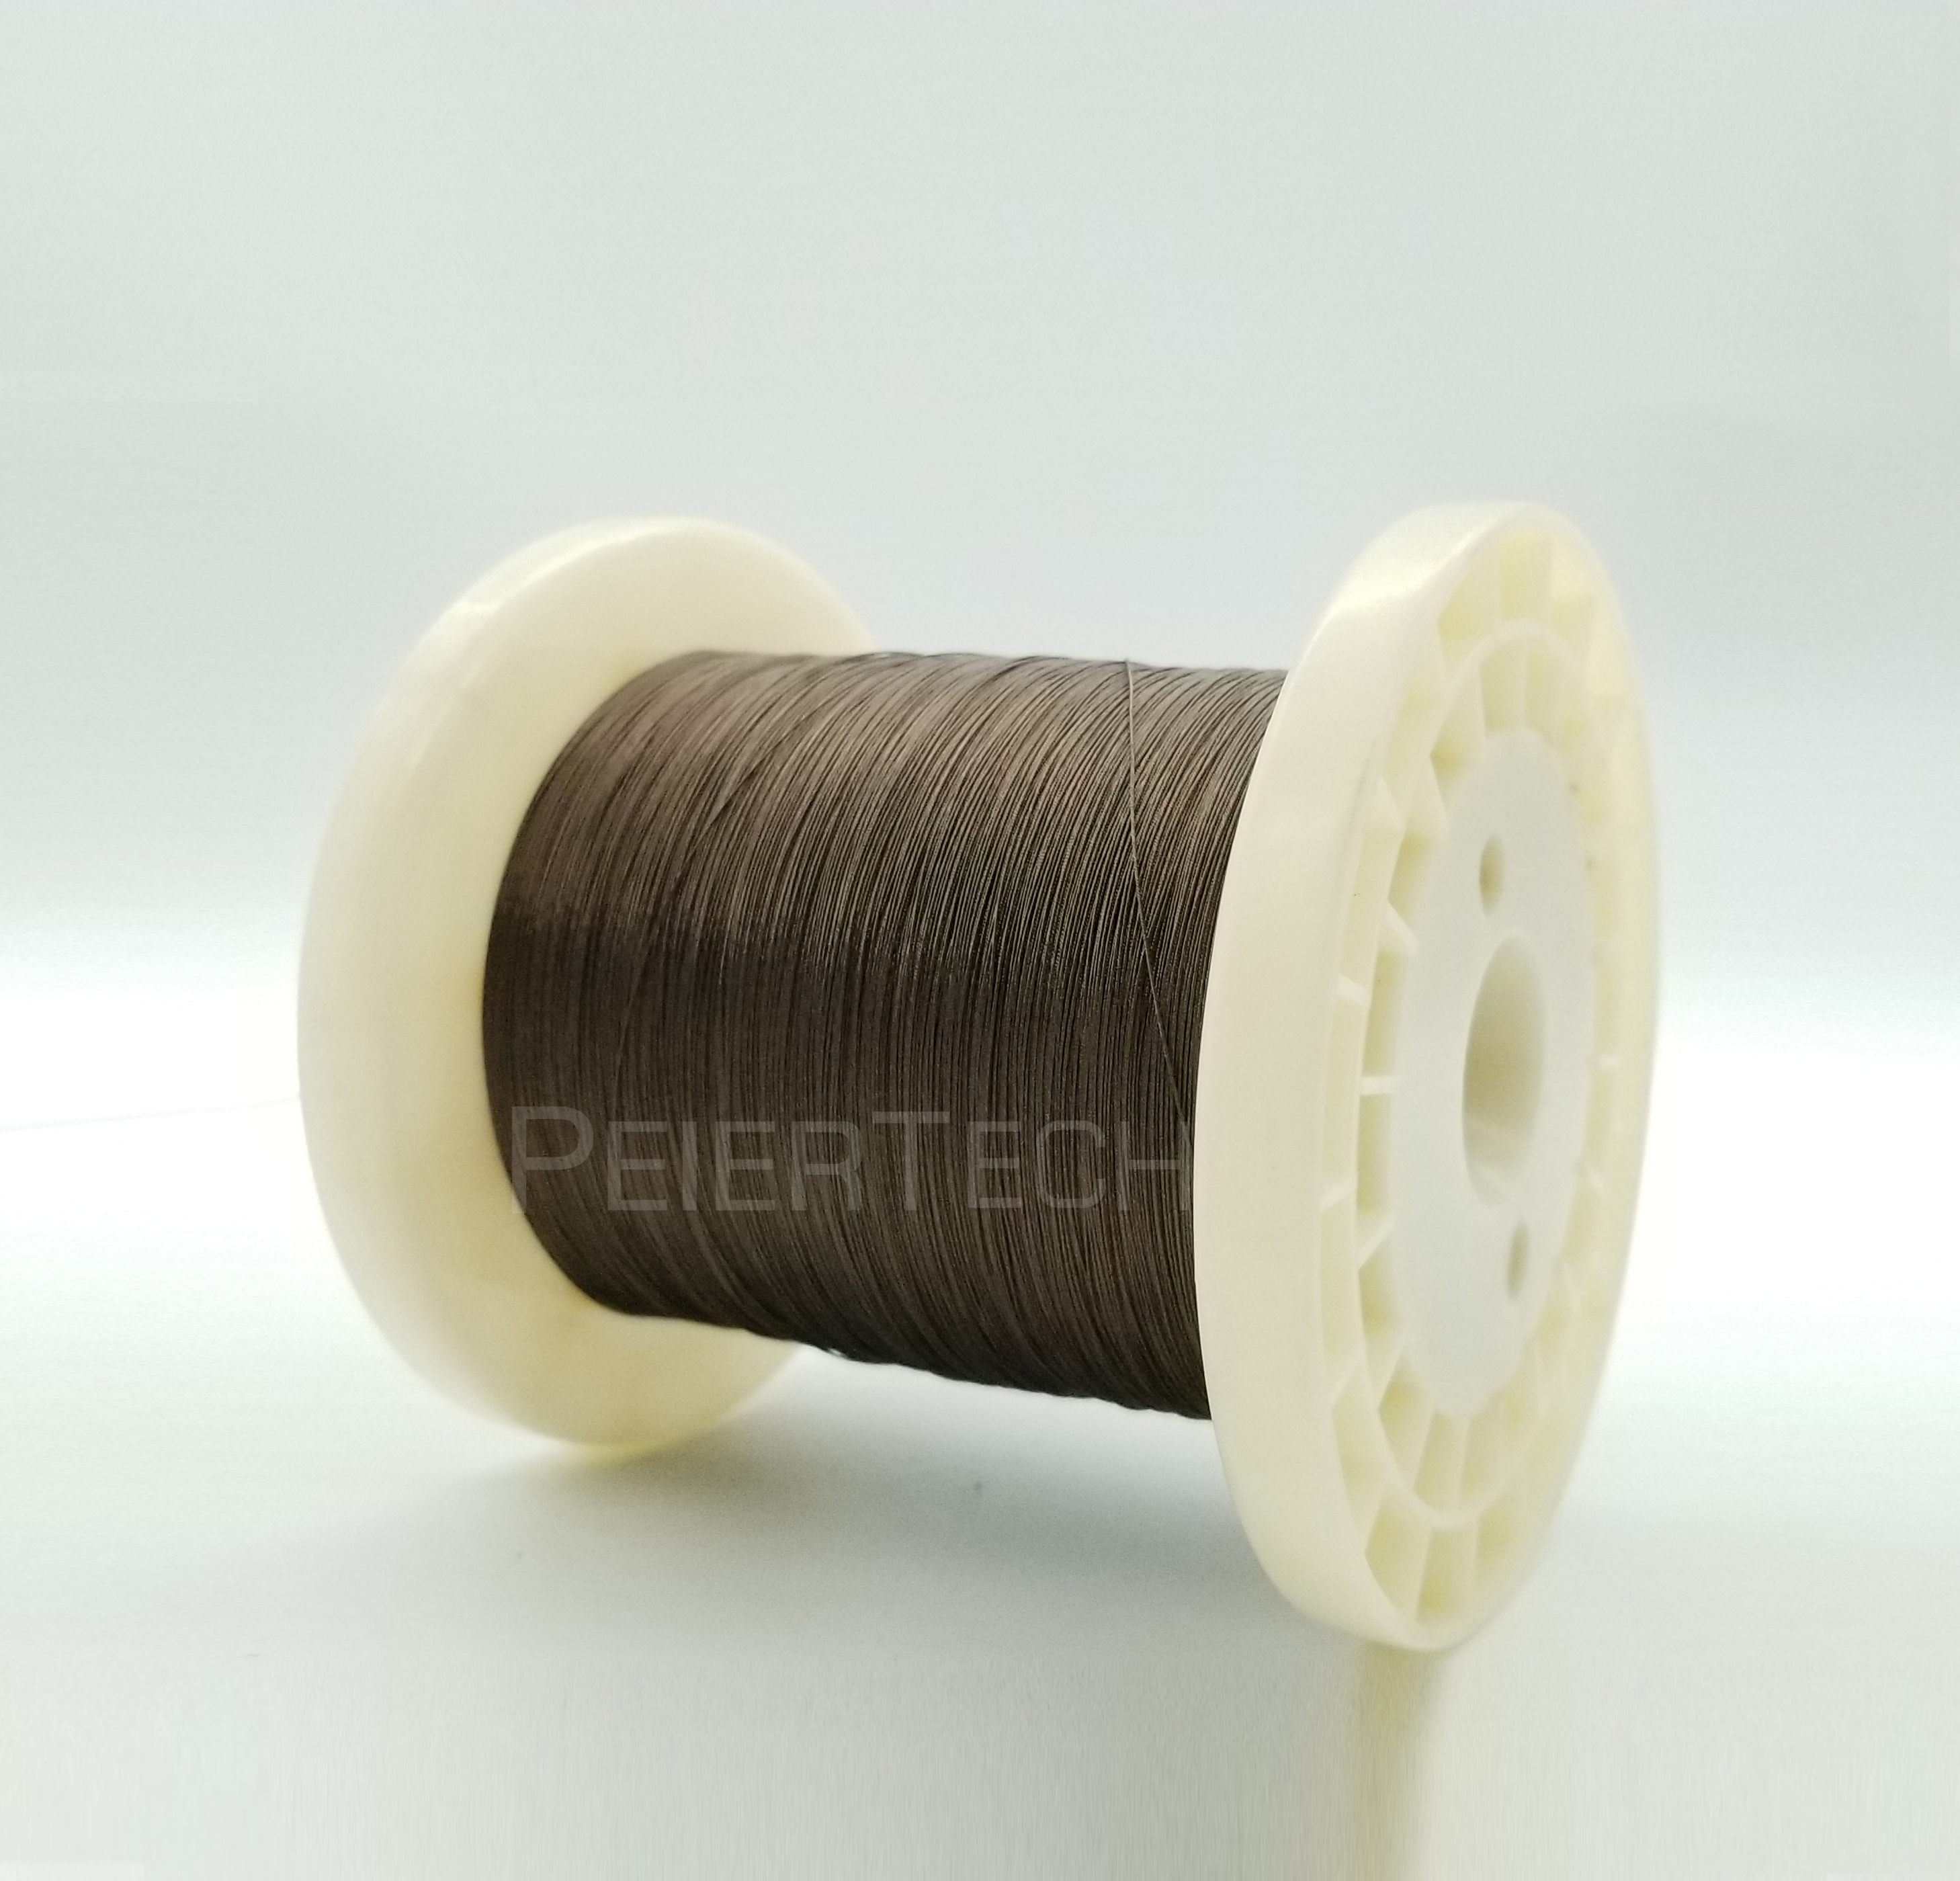 Super-elastic NiTi Rope for Orthopedic Cable System